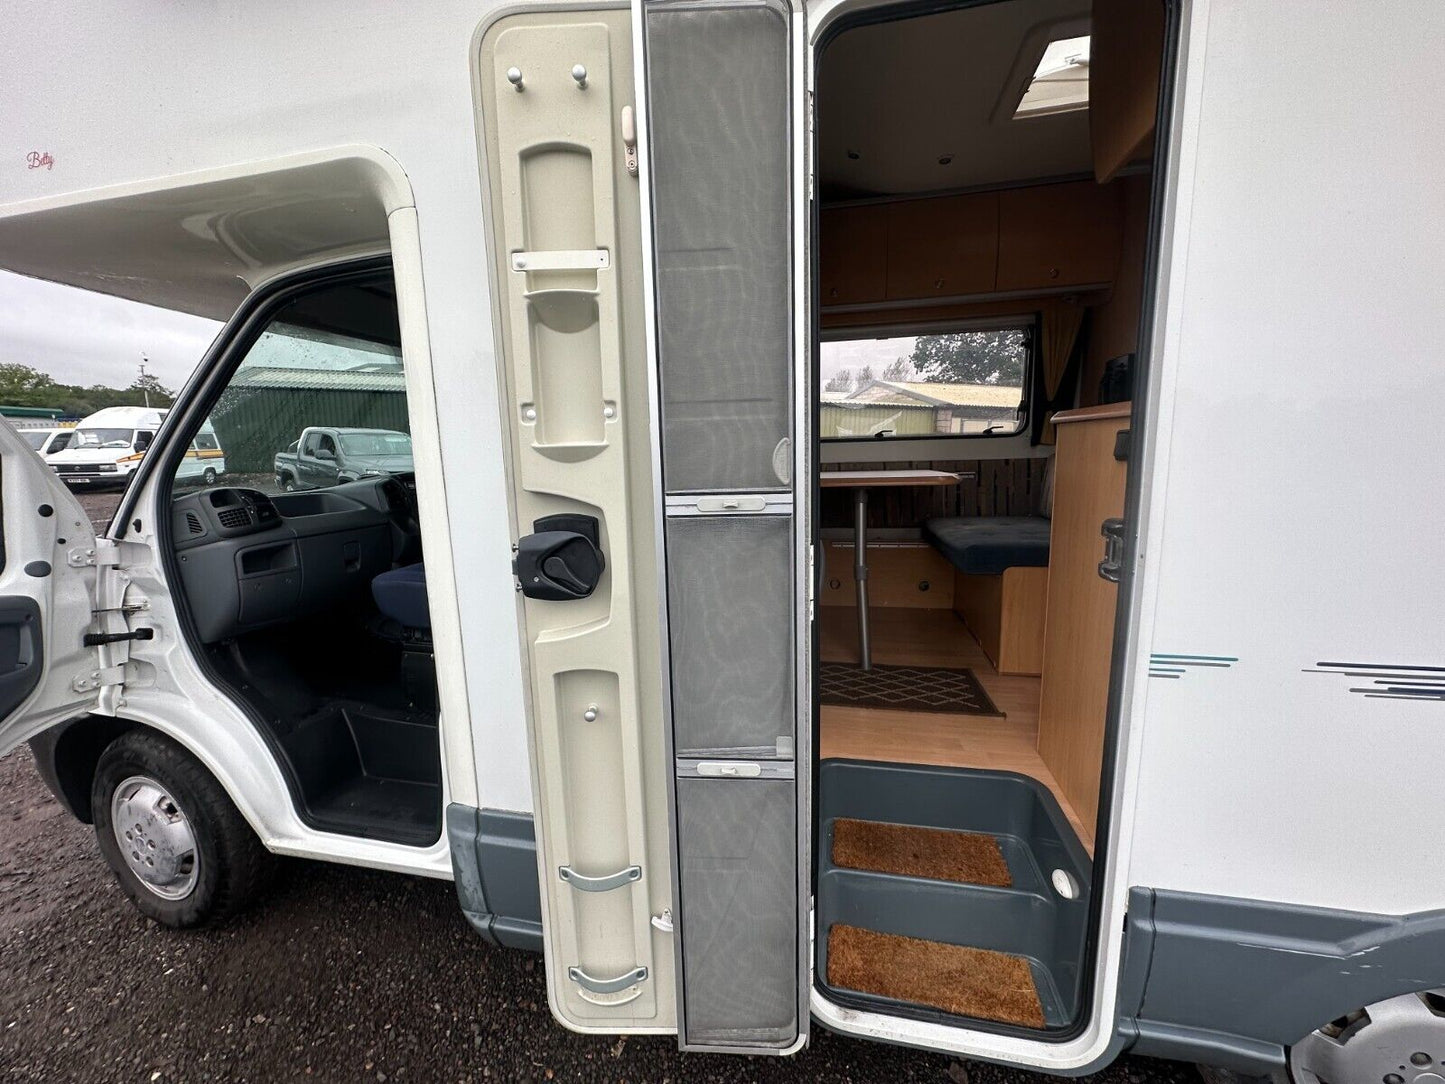 Bid on BIKE RACK, TOWBAR, AND MORE: '54 FIAT DUCATO CAMPER MILEAGE: 65167 MOT: FEB 2024 (NO VAT ON HAMMER)- Buy &amp; Sell on Auction with EAMA Group